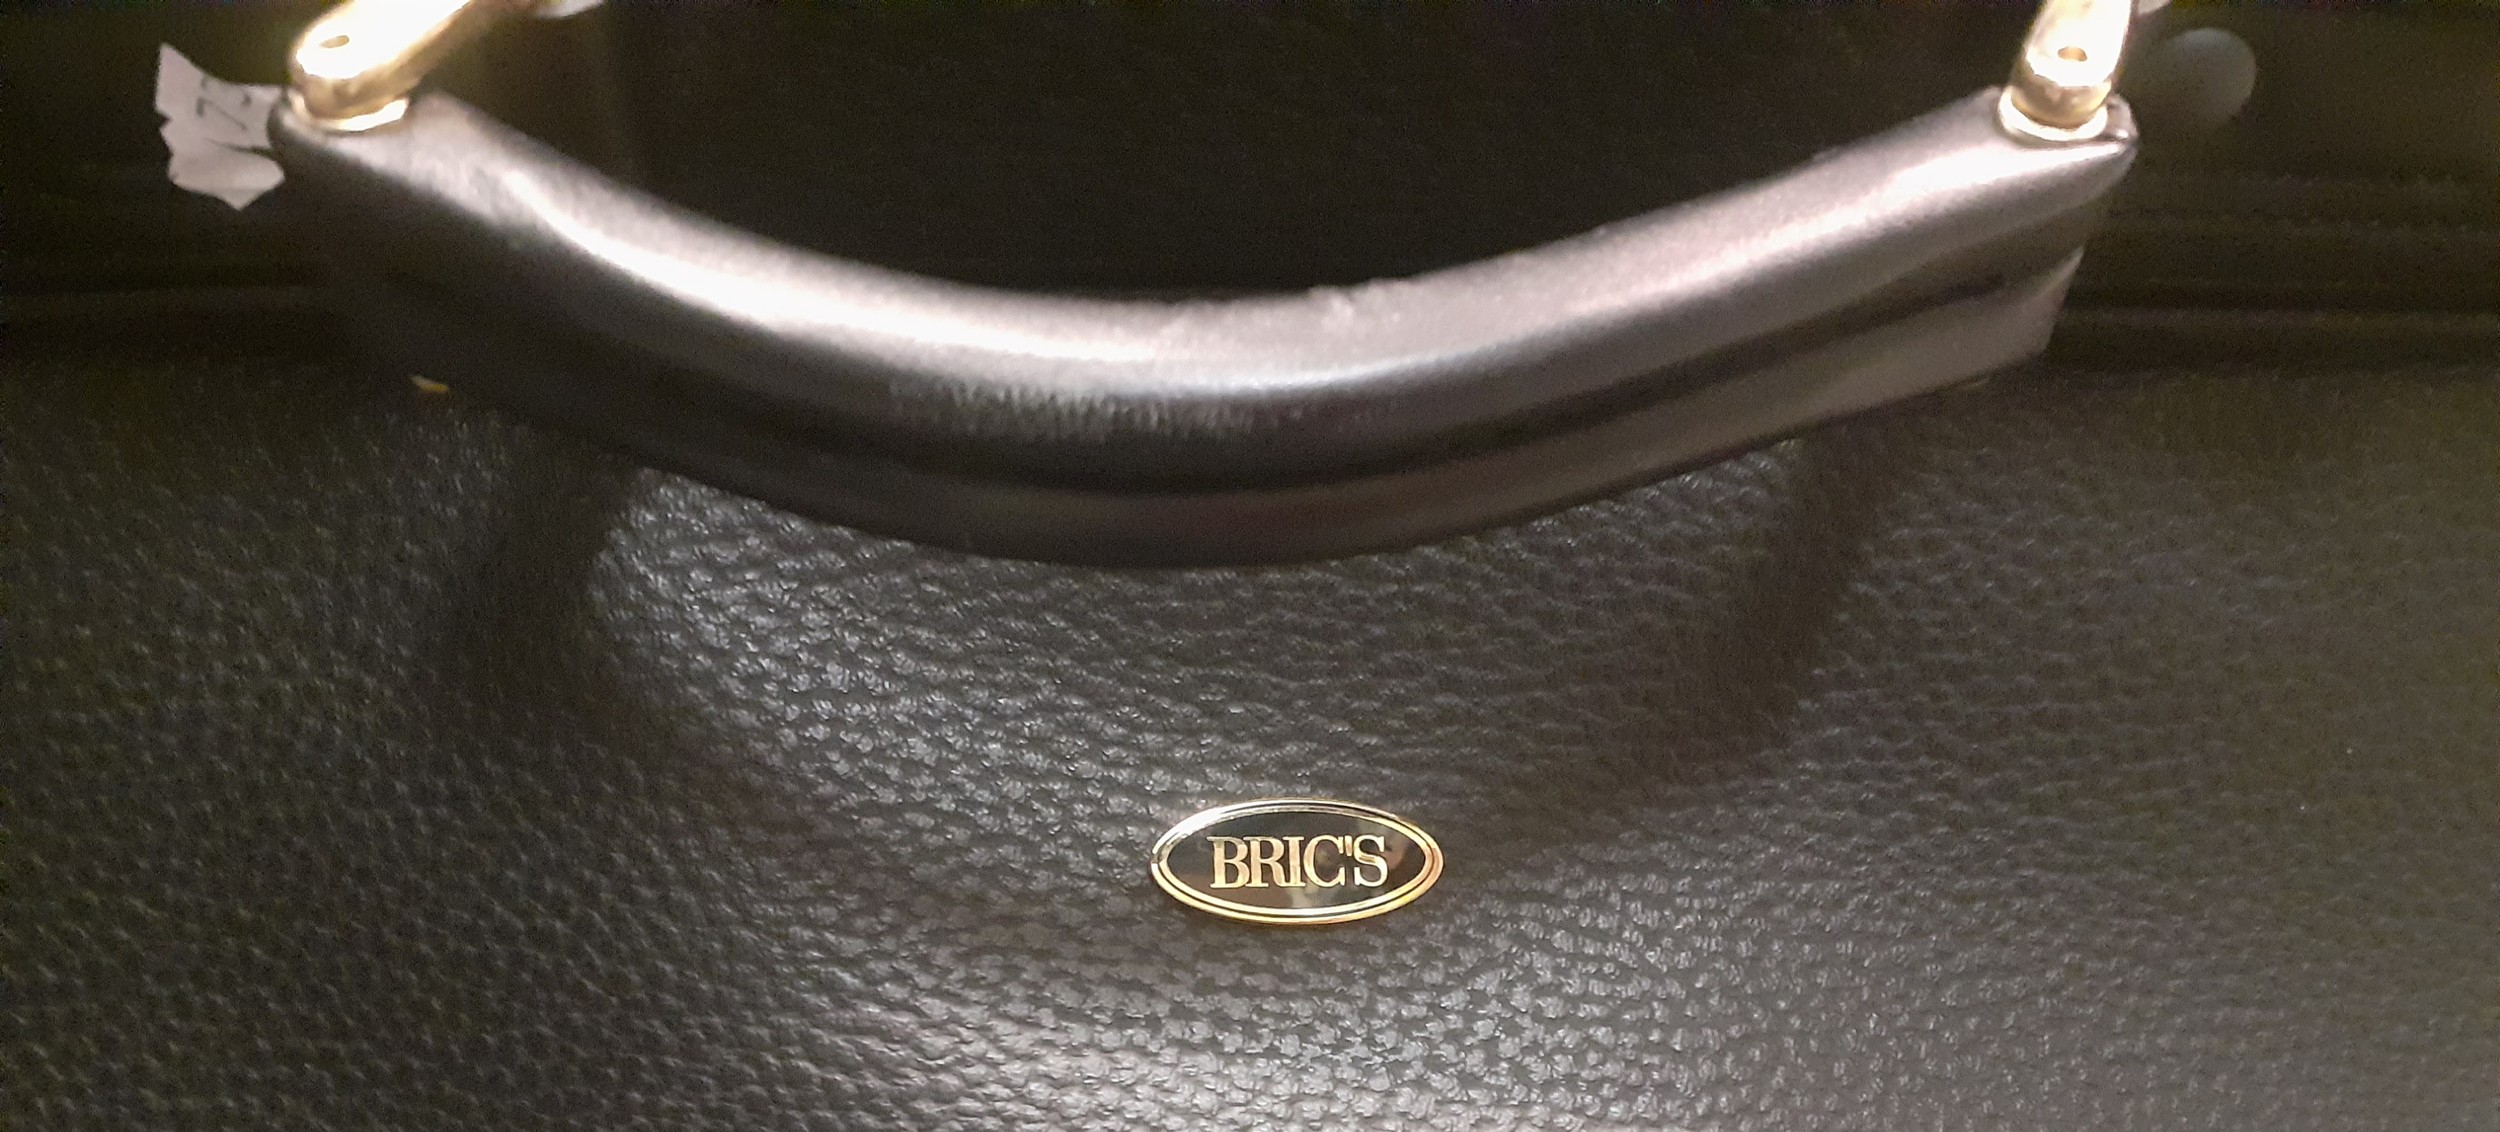 Brics-A large black textured leather folding suit carrier/weekend bag 18"high x 23"wide folded and - Image 2 of 9